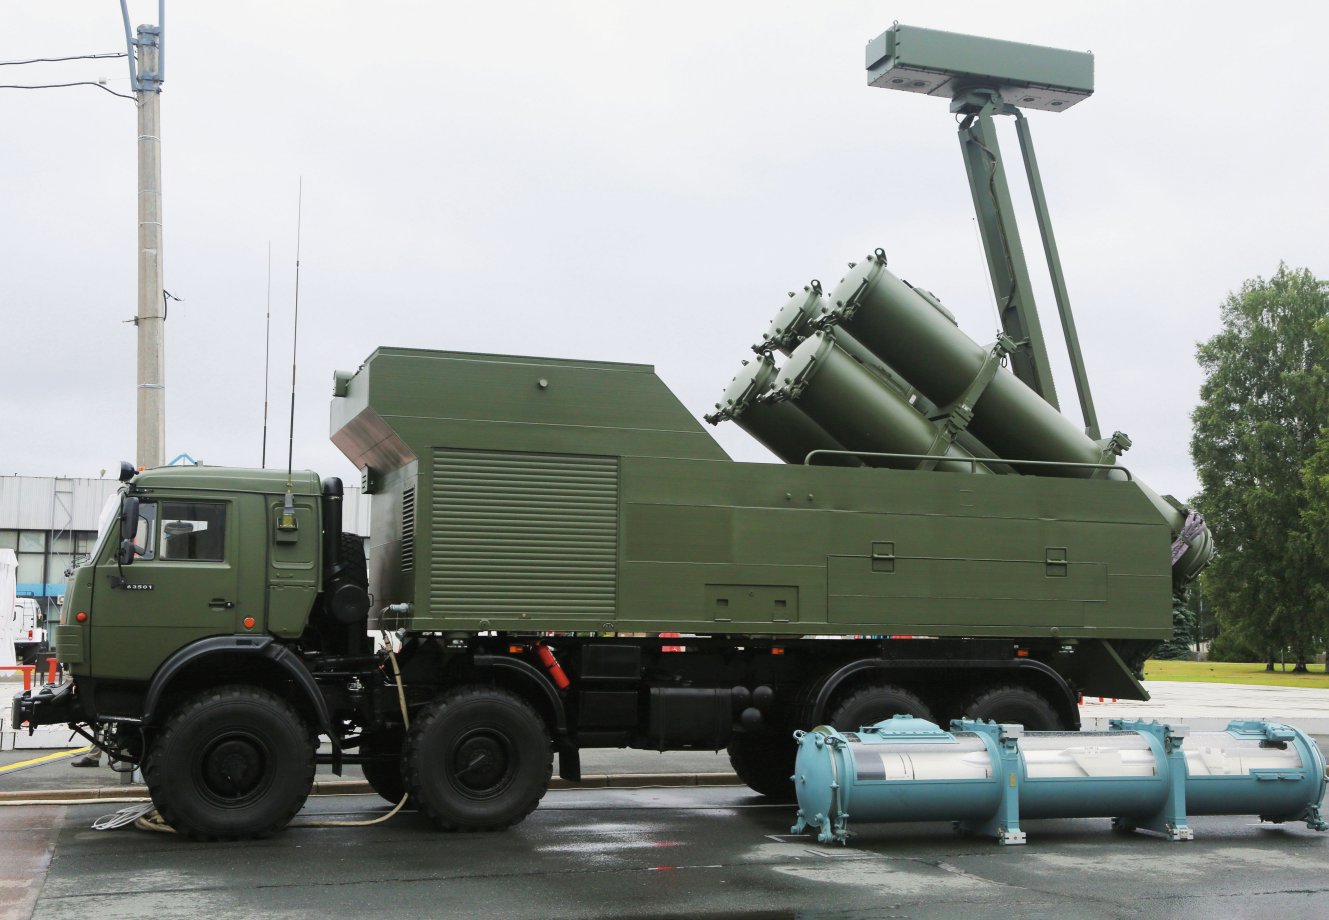 The Typhoon JSC Research and Production Enterprise Rubezh-ME mobile anti-ship missile system is shown here with a canistered Kh-35UE round in the foreground. (N Novichkov)